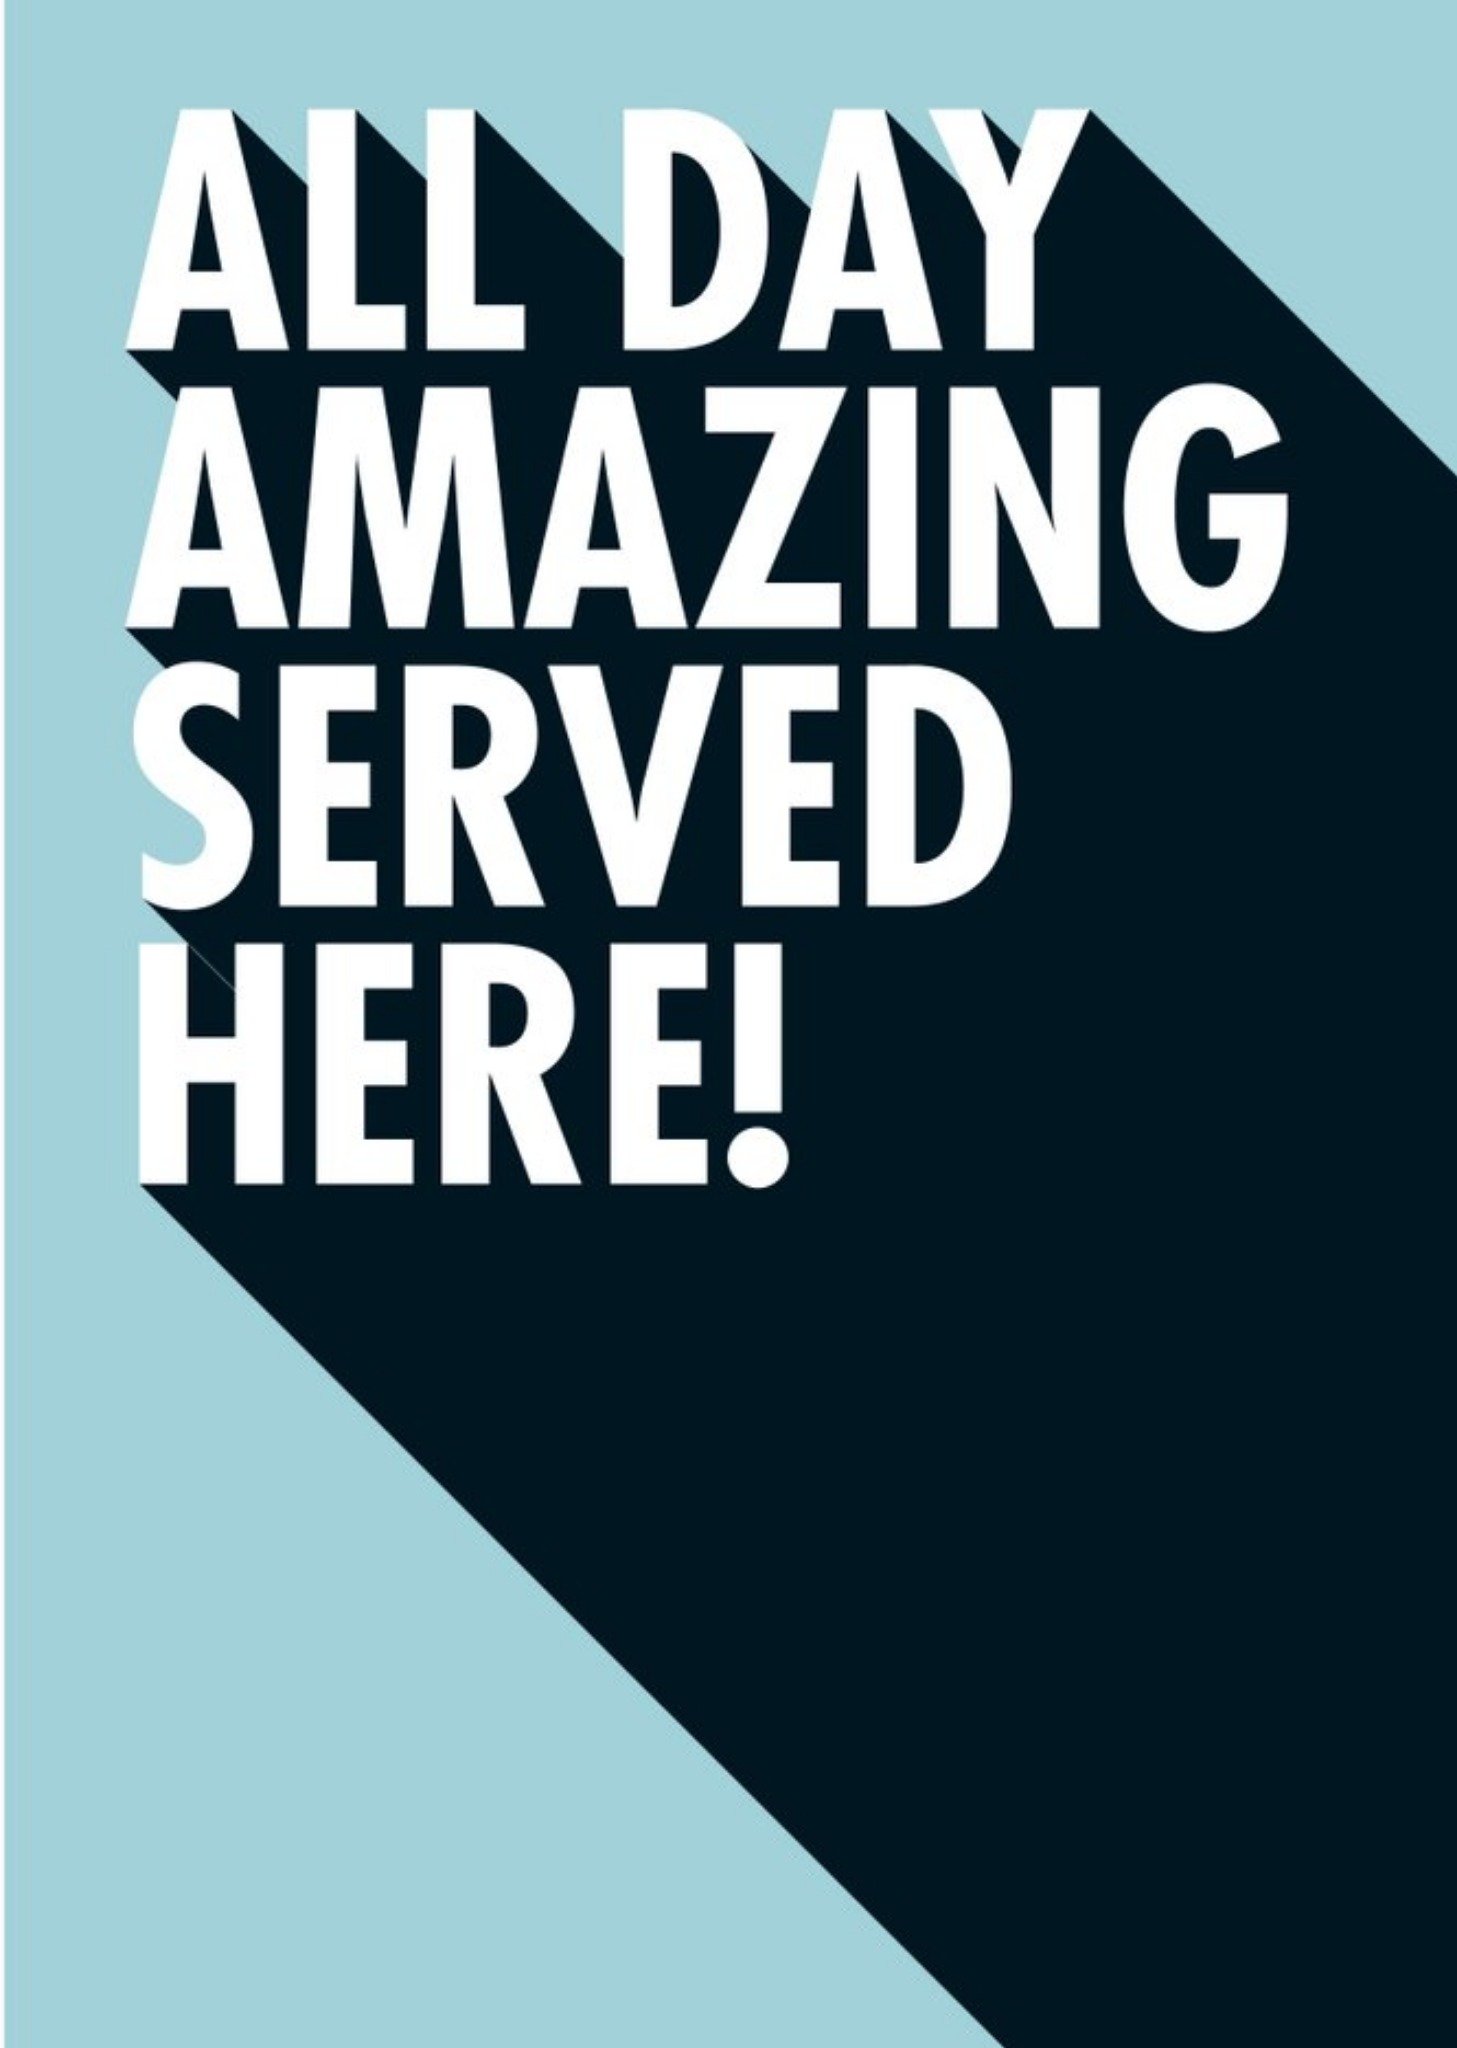 Moonpig All Day Amazing Served Here Funny Typographic Card, Large